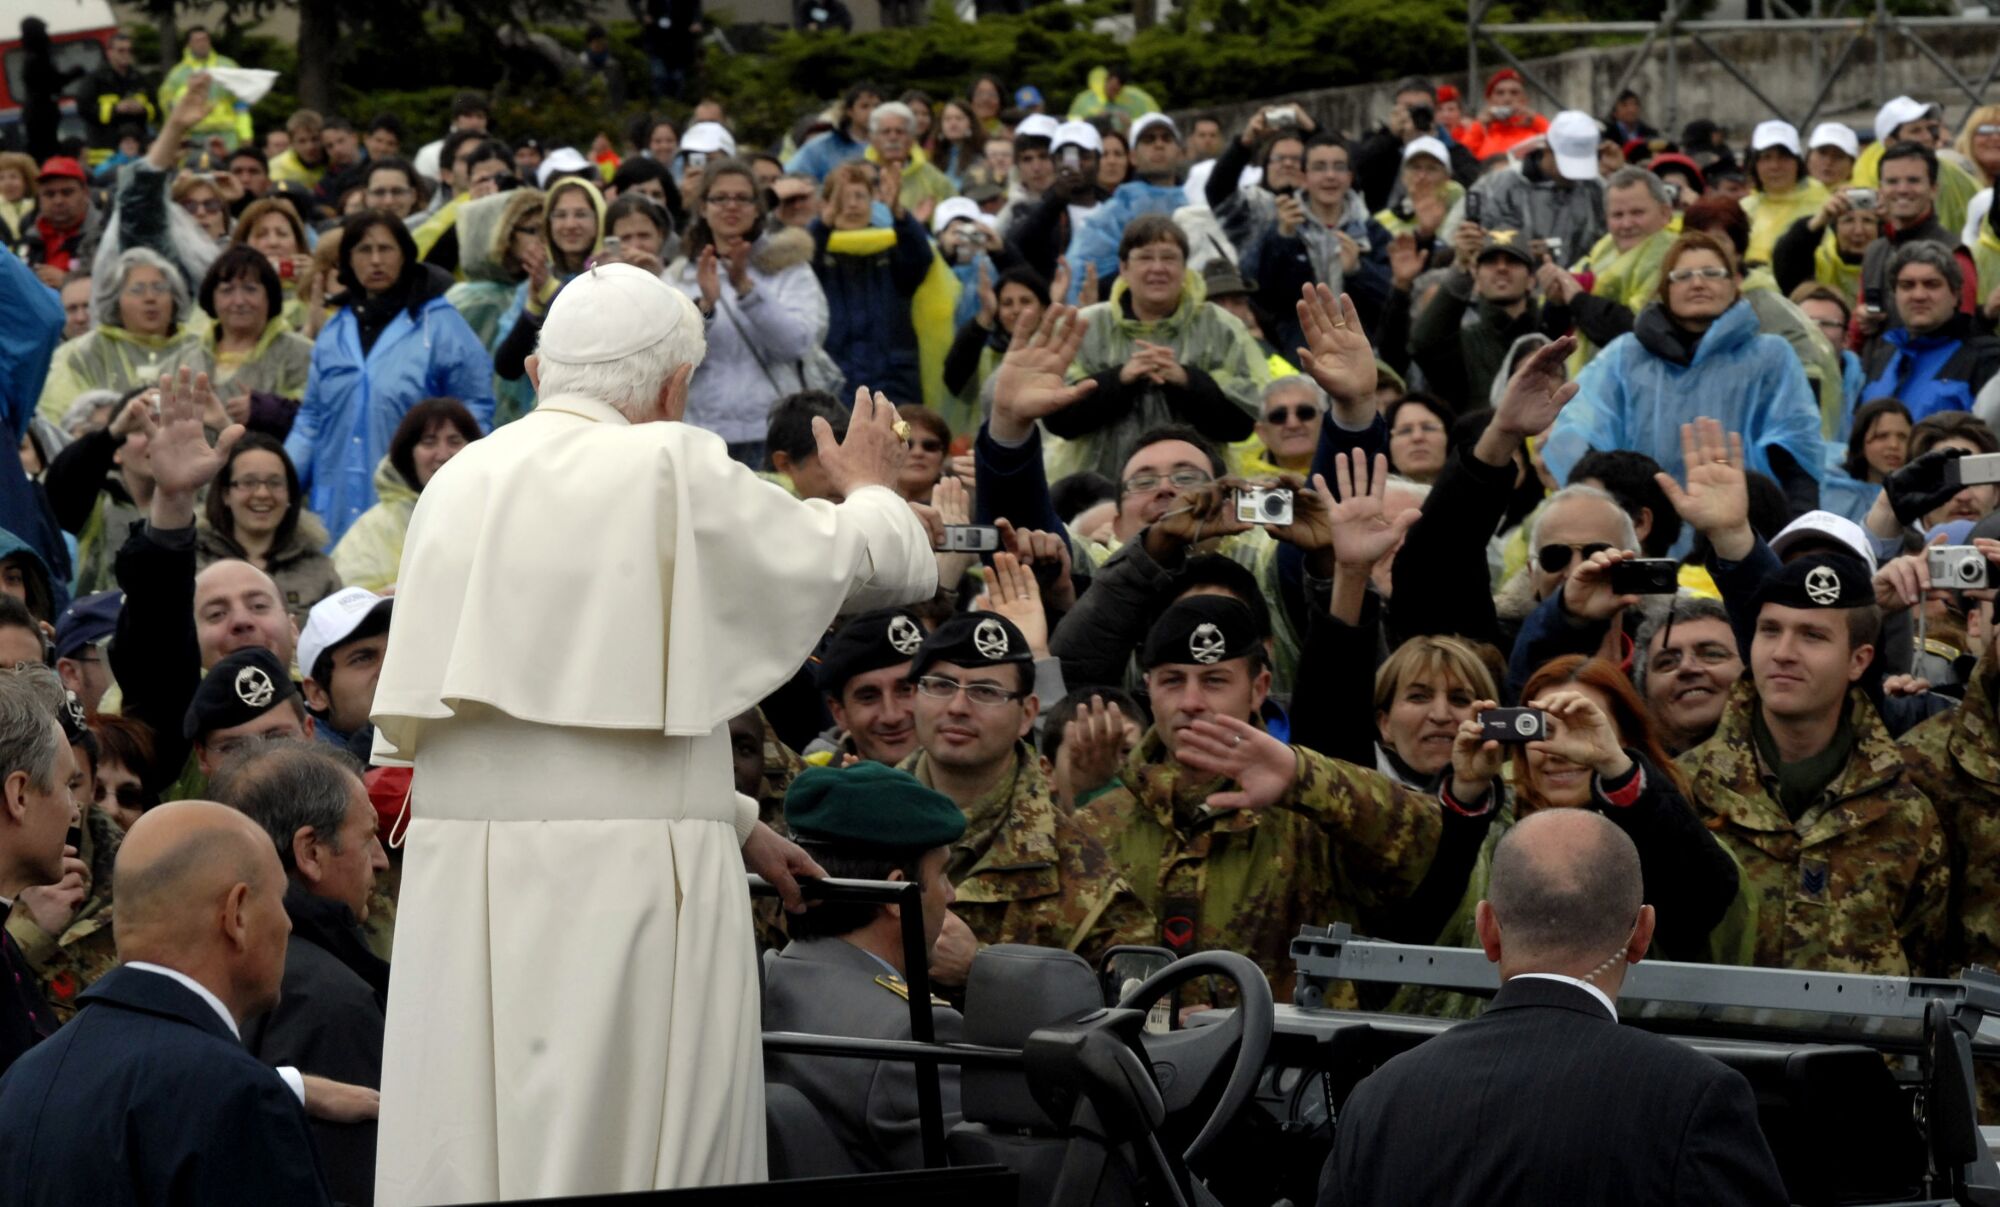 Pope Benedict XVI greets people including a group of soldiers in a crowd.